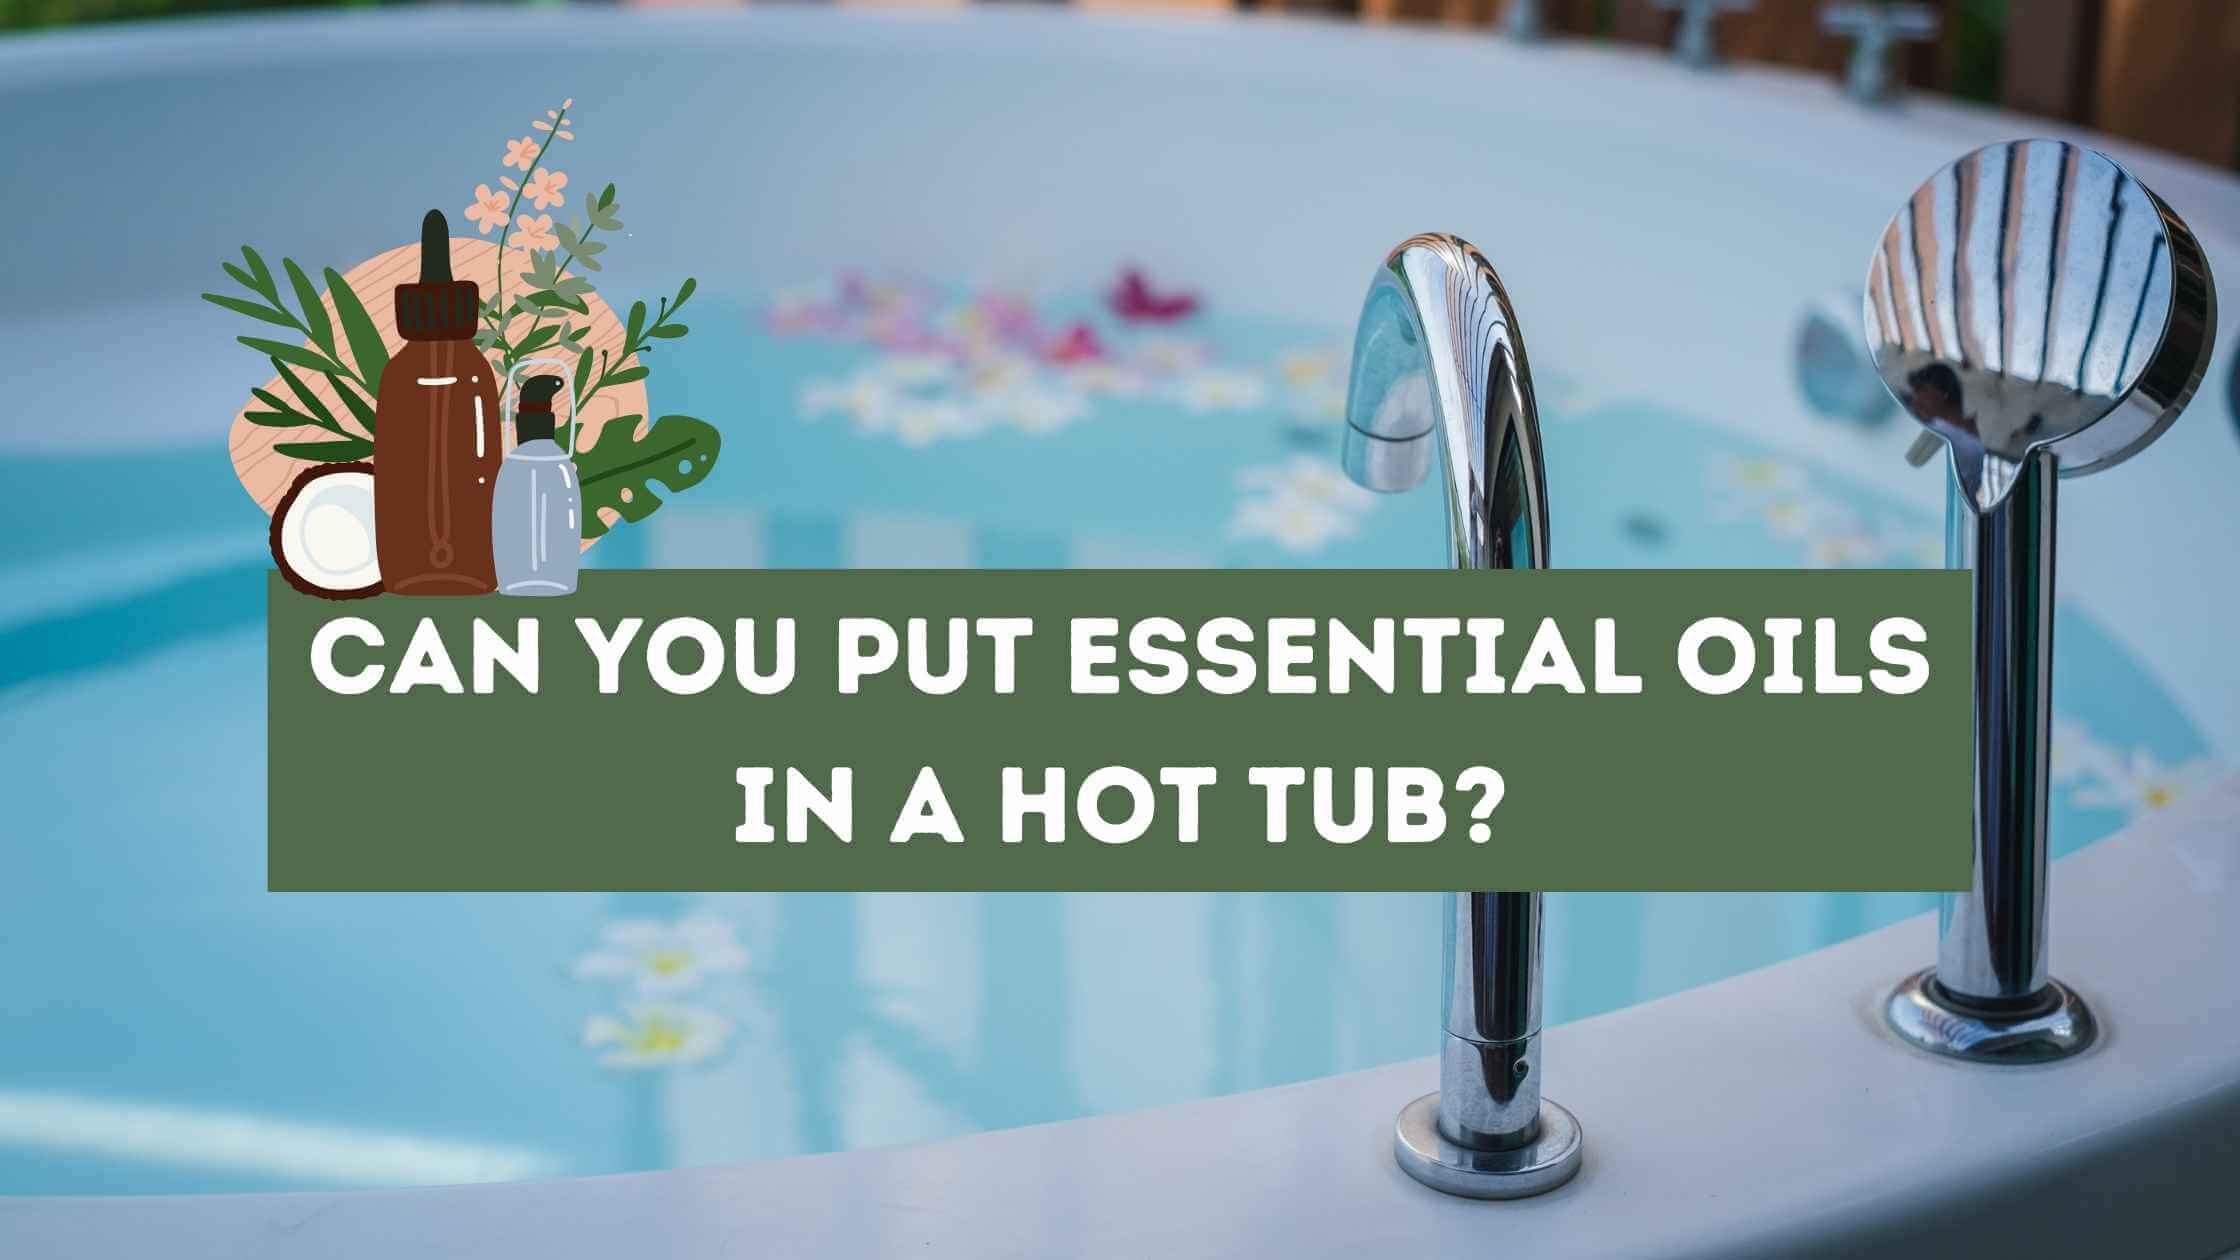 Can You Put Essential Oils in a Hot Tub